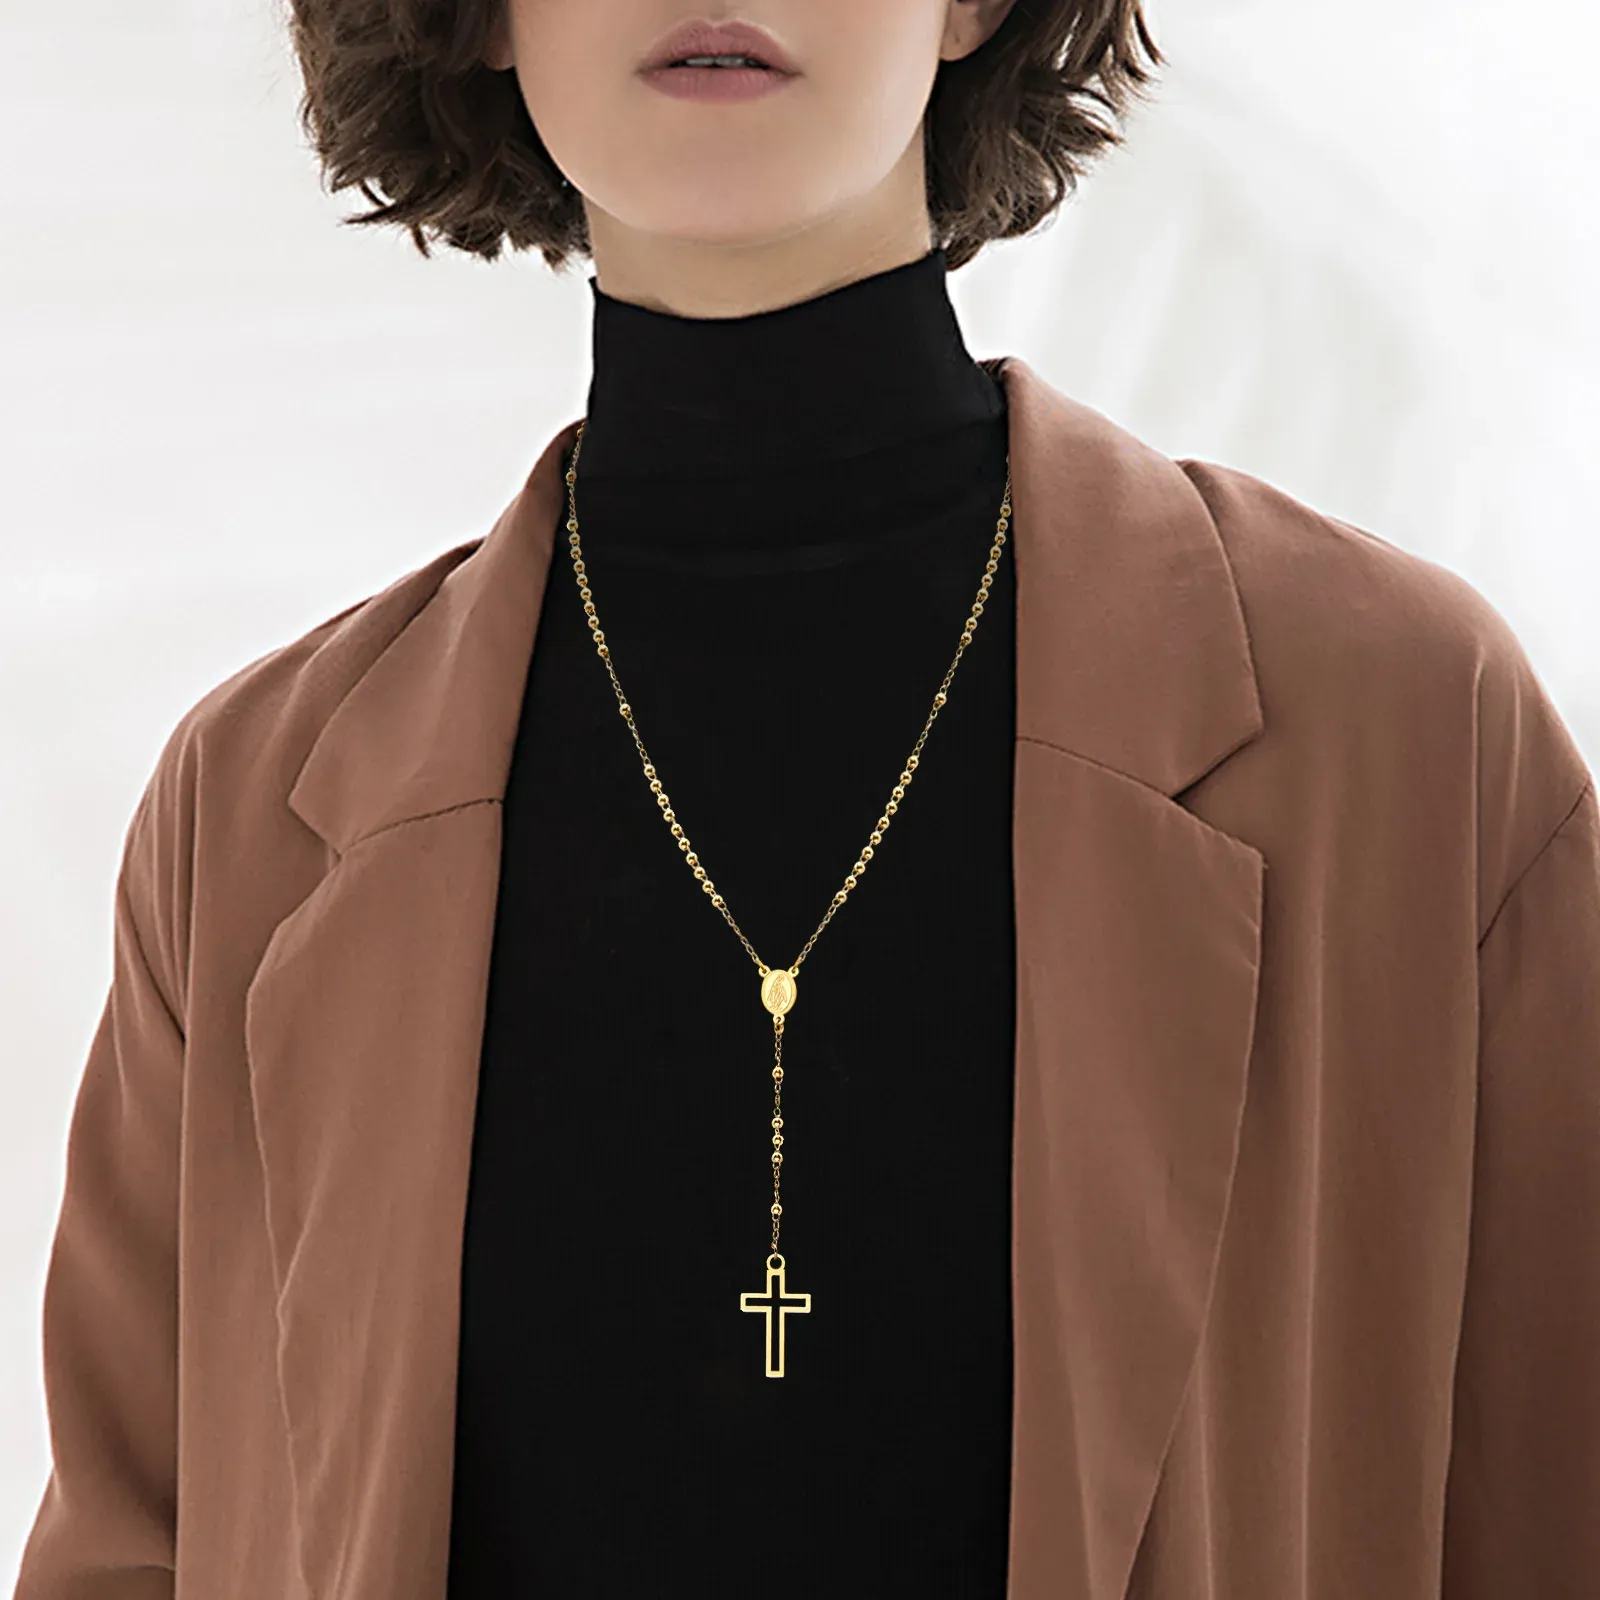 Cross Rosary Necklaces for Women, Hollow Cross Maria Pendant, 14k Gold Christ Jesus Prayer Jewelry